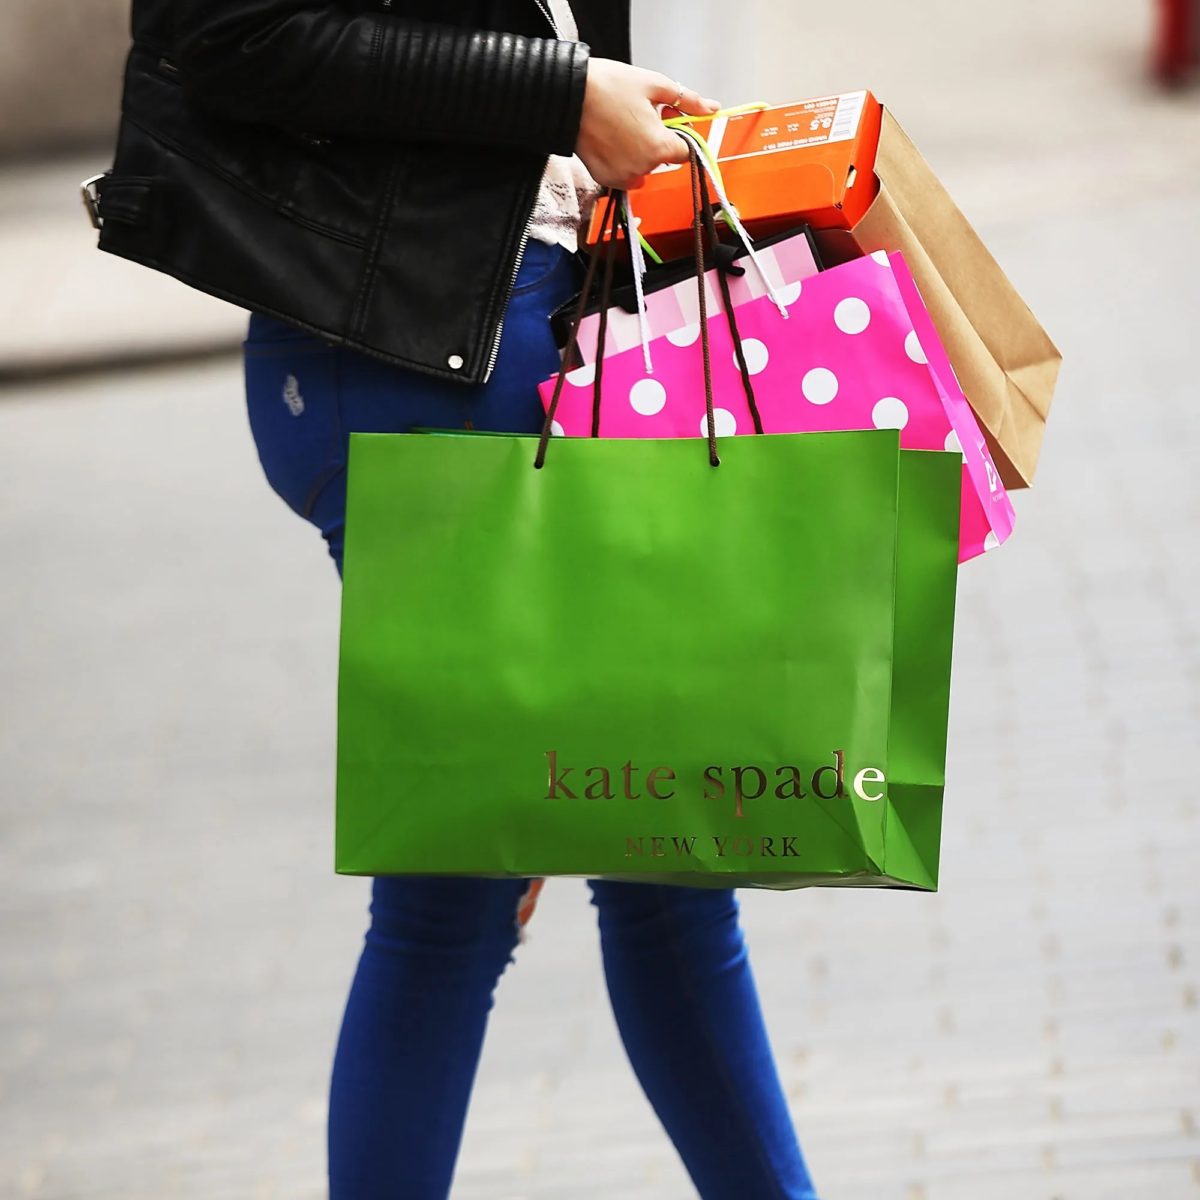 This is Who Kate Spade Parent Tapestry Inc. Has Tapped as New CFO